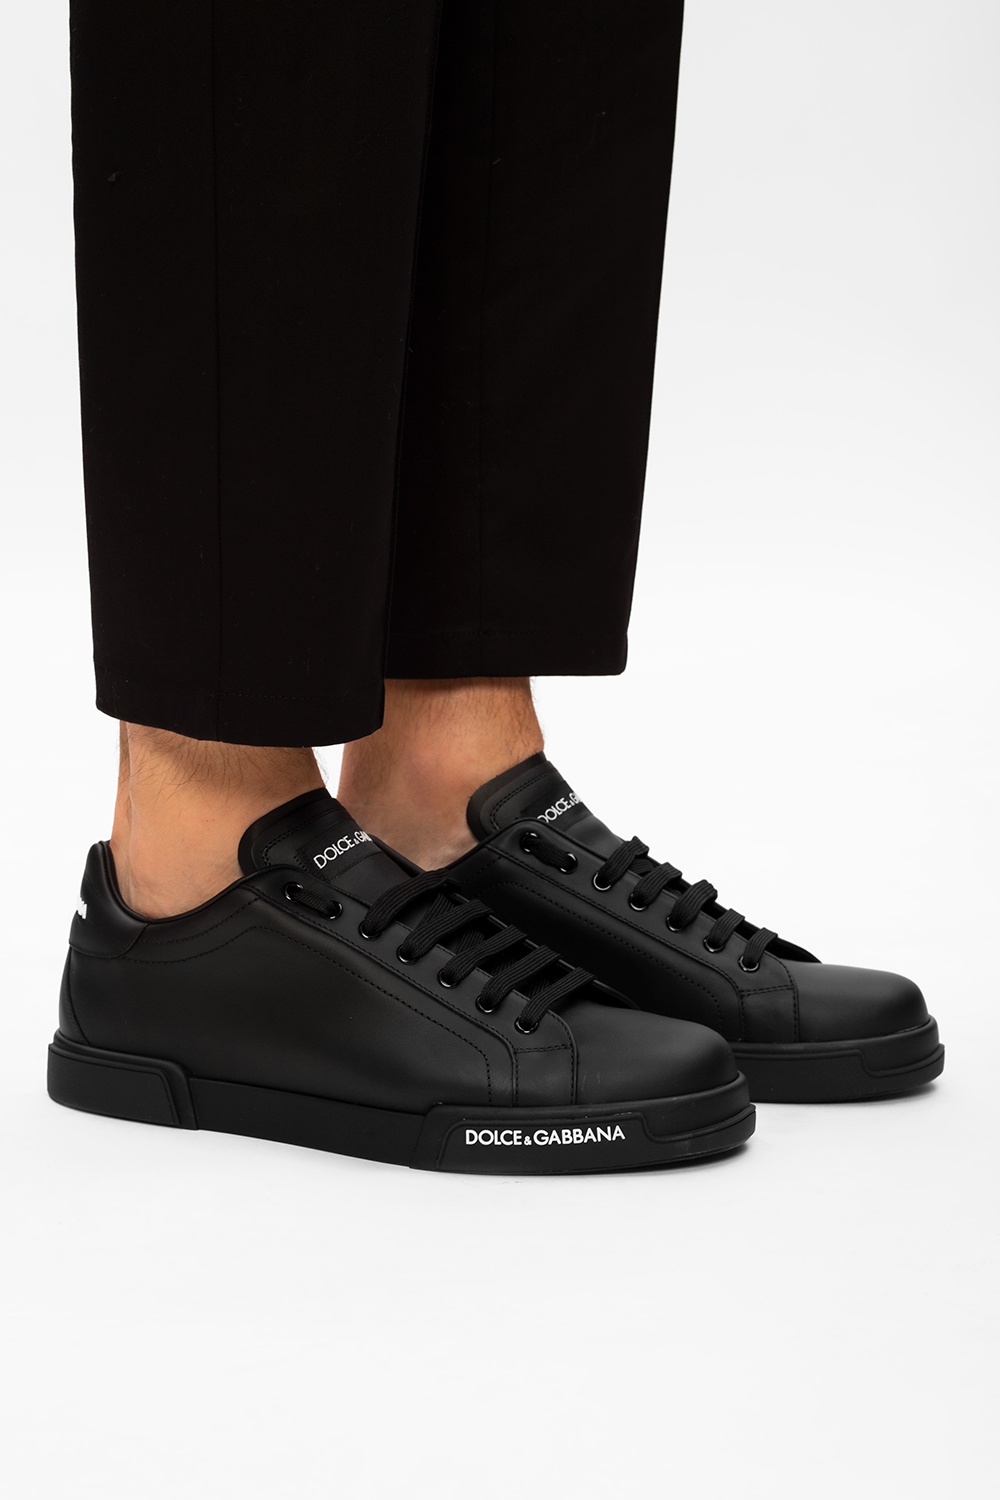 dolce and gabbana black shoes